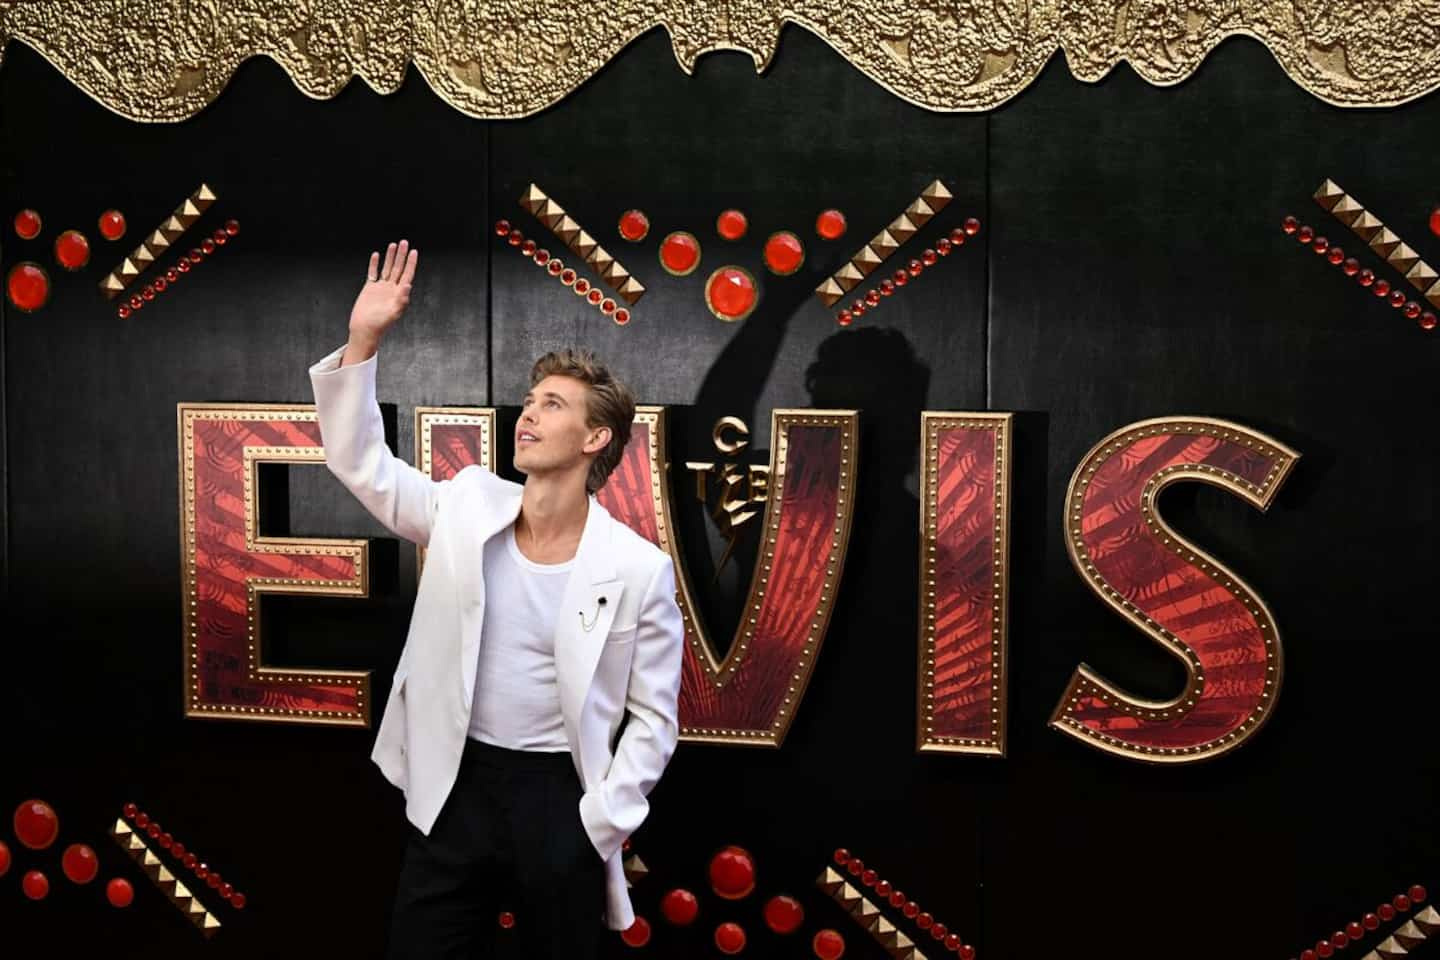 'Elvis' puts the King of Rock and Roll back in the North American box office spotlight